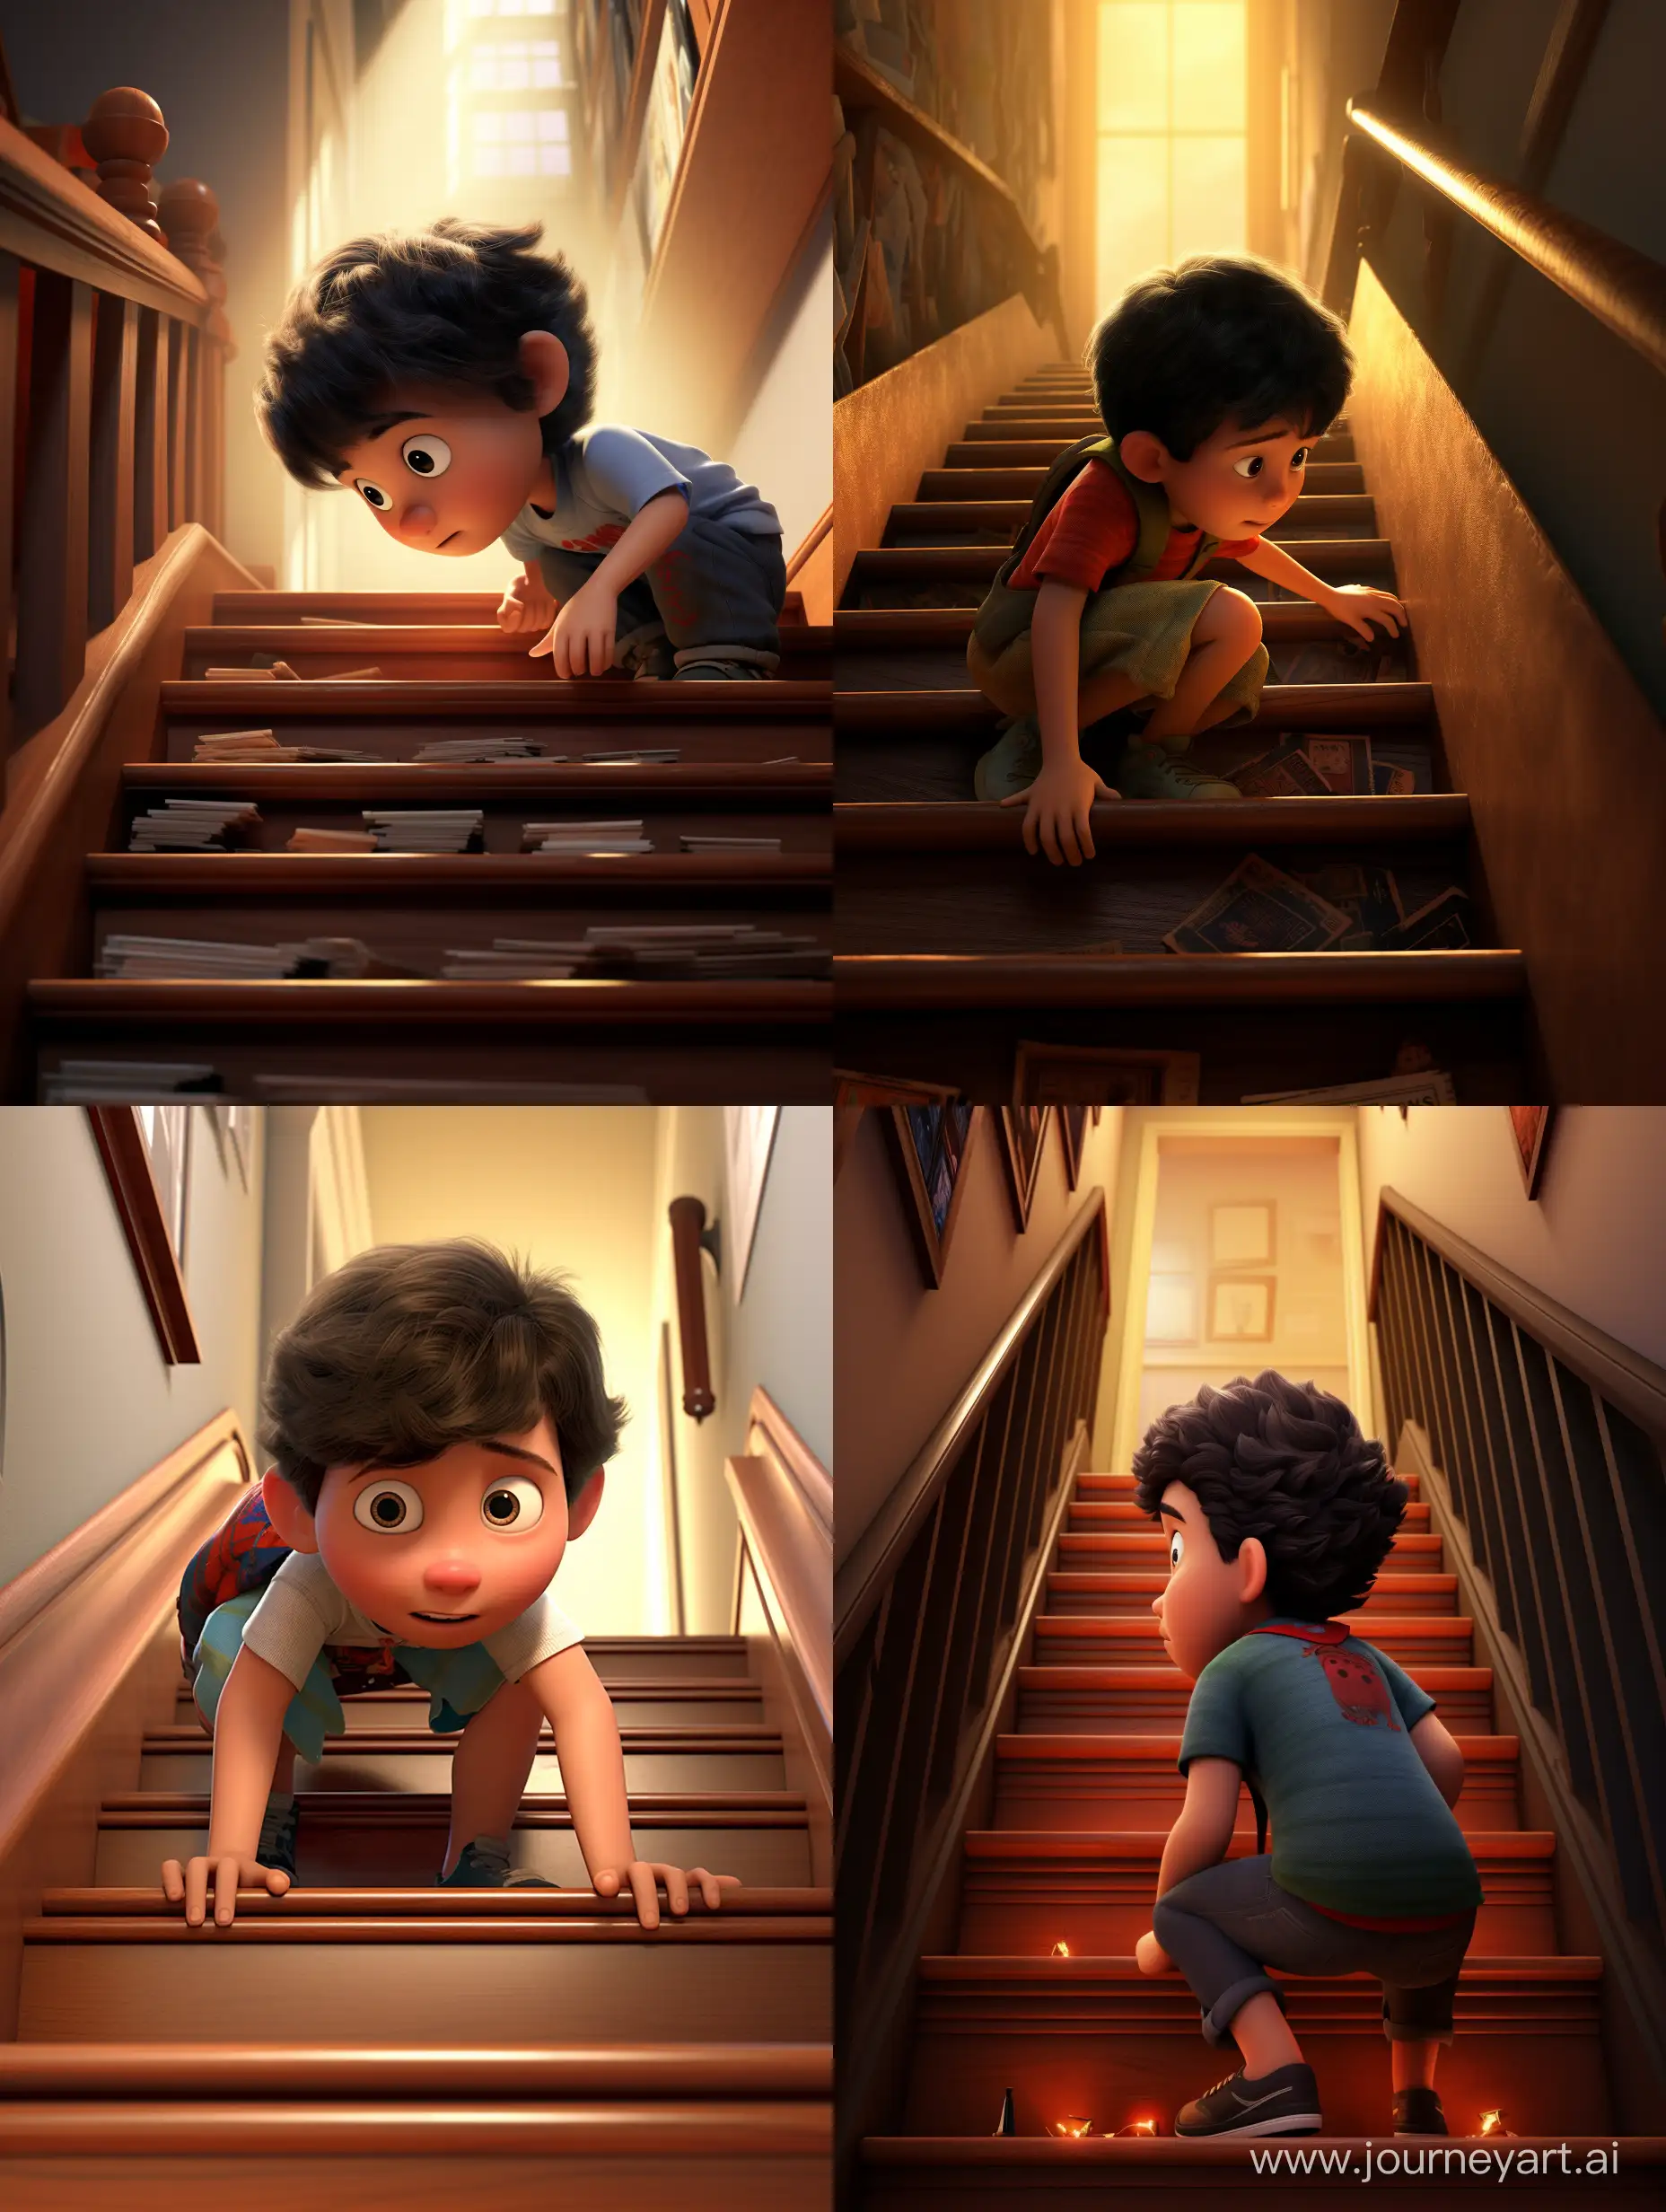 Adorable-Child-Descending-Stairs-in-Pixar-Style